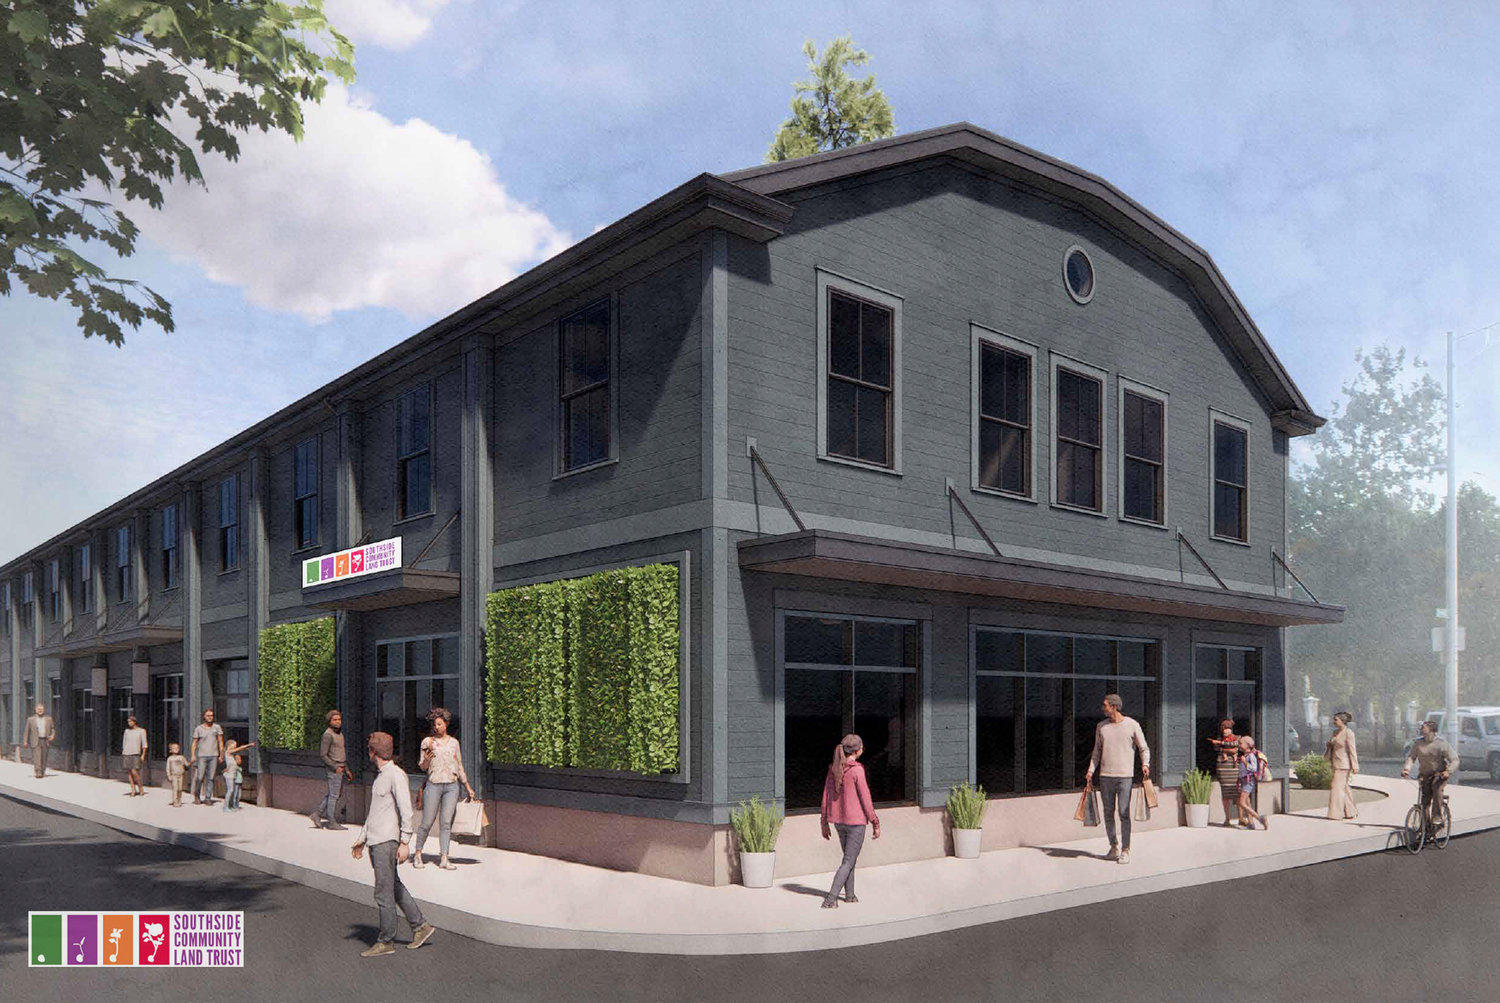 SCLT’s new community food hub on Broad Street is slated to open this summer